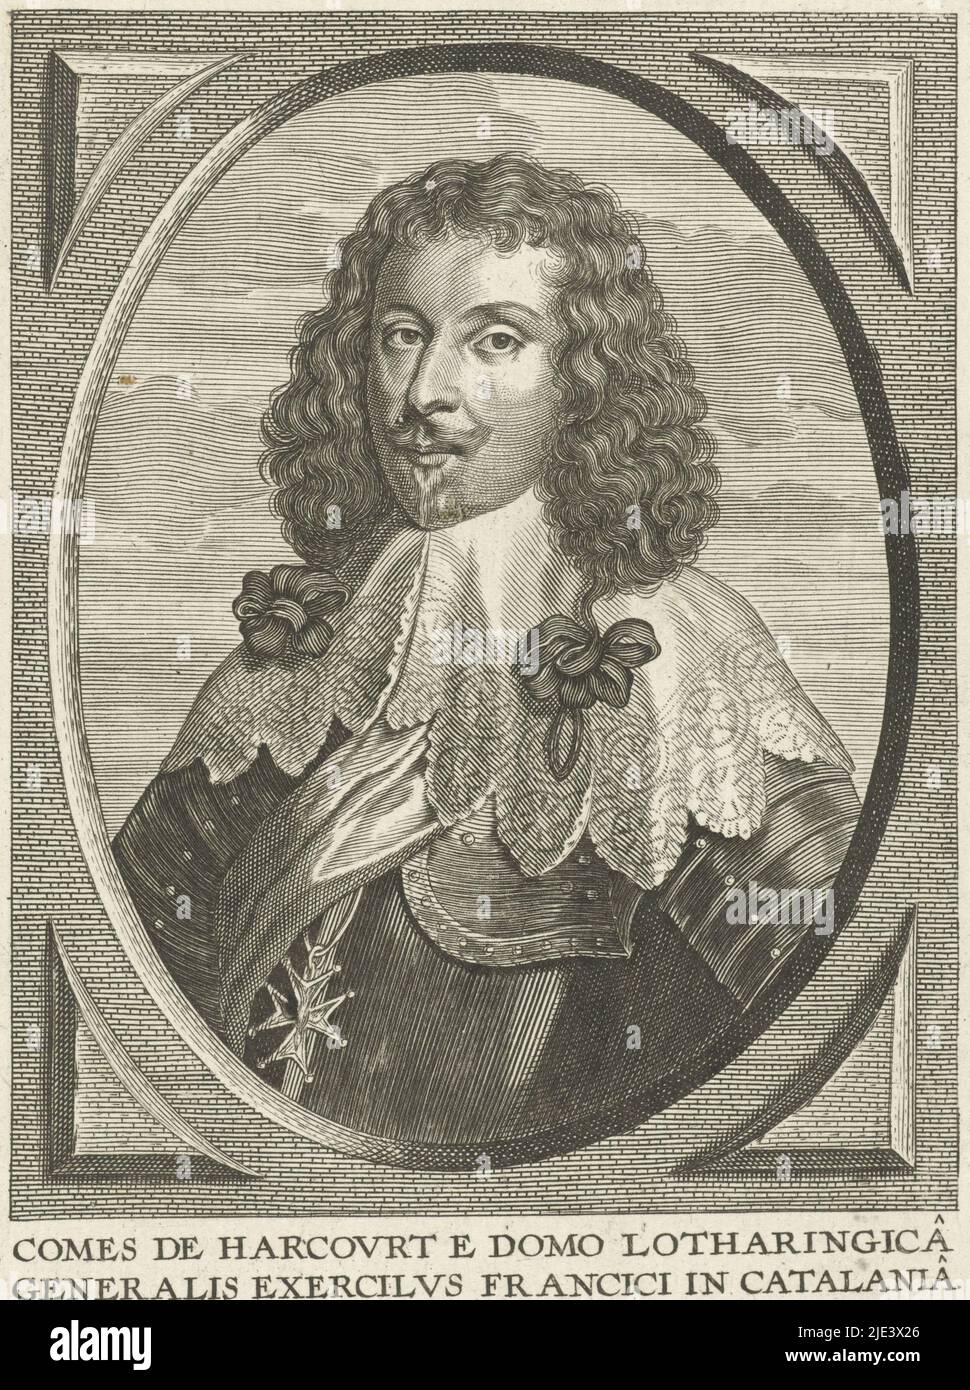 Portrait of Henri de Lorraine, Pieter de Jode (II), 1628 - 1670, Bust portrait of Henri de Lorraine, Count of Harcourt, in armor. He wears a pendant bearing the Order of the Holy Ghost. The portrait is framed in an oval frame with square border work. In the margin a two-line caption in Latin., publisher: Pieter de Jode (II), (mentioned on object), print maker: anonymous, Antwerp, 1628 - 1670, paper, engraving, h 172 mm × w 125 mm Stock Photo